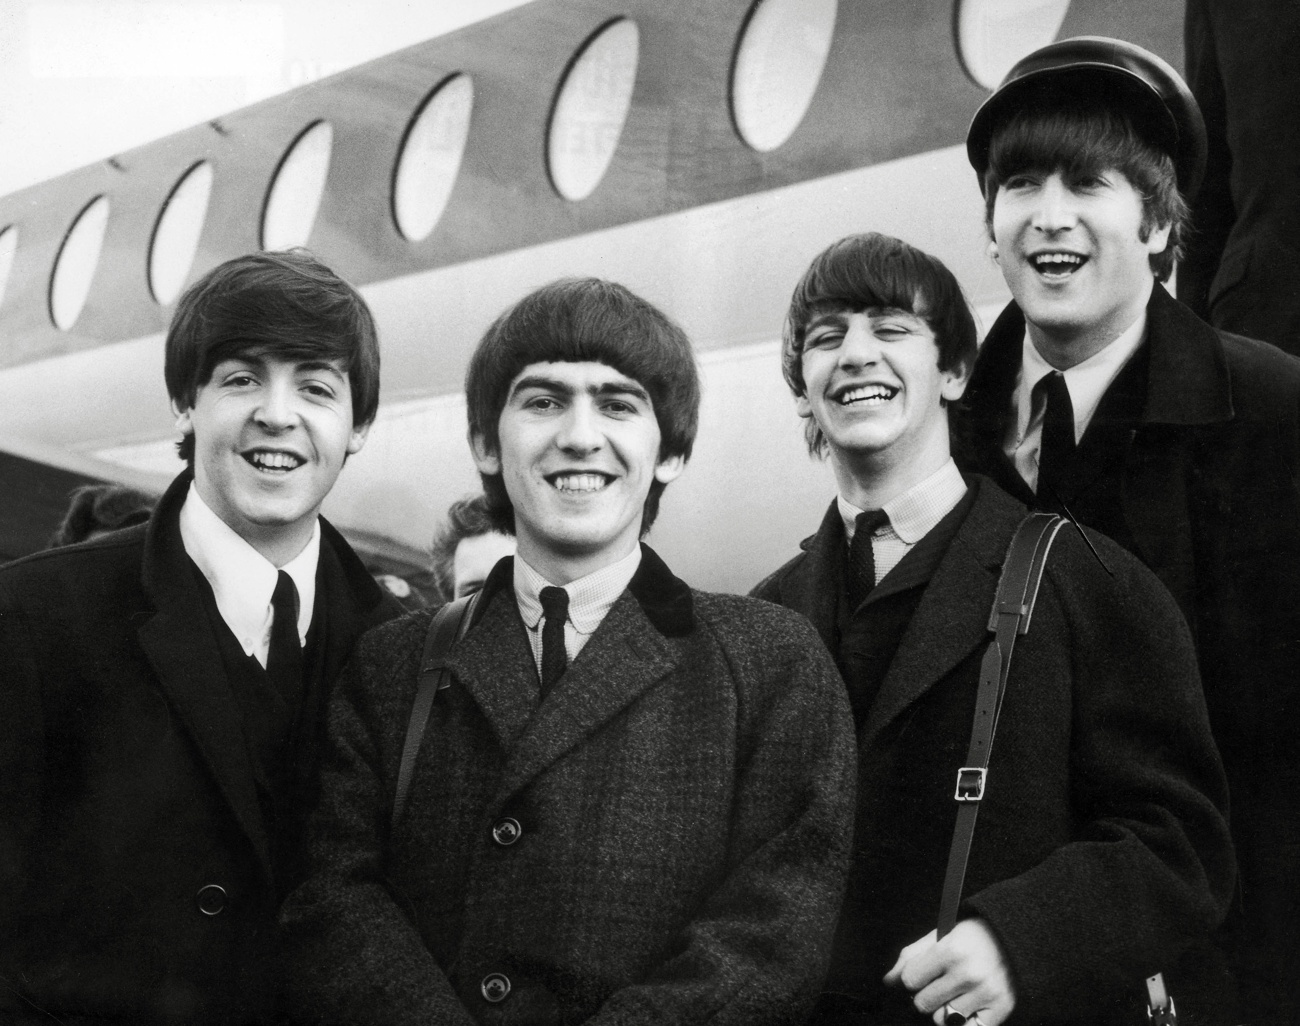 53 years since The Beatles split up